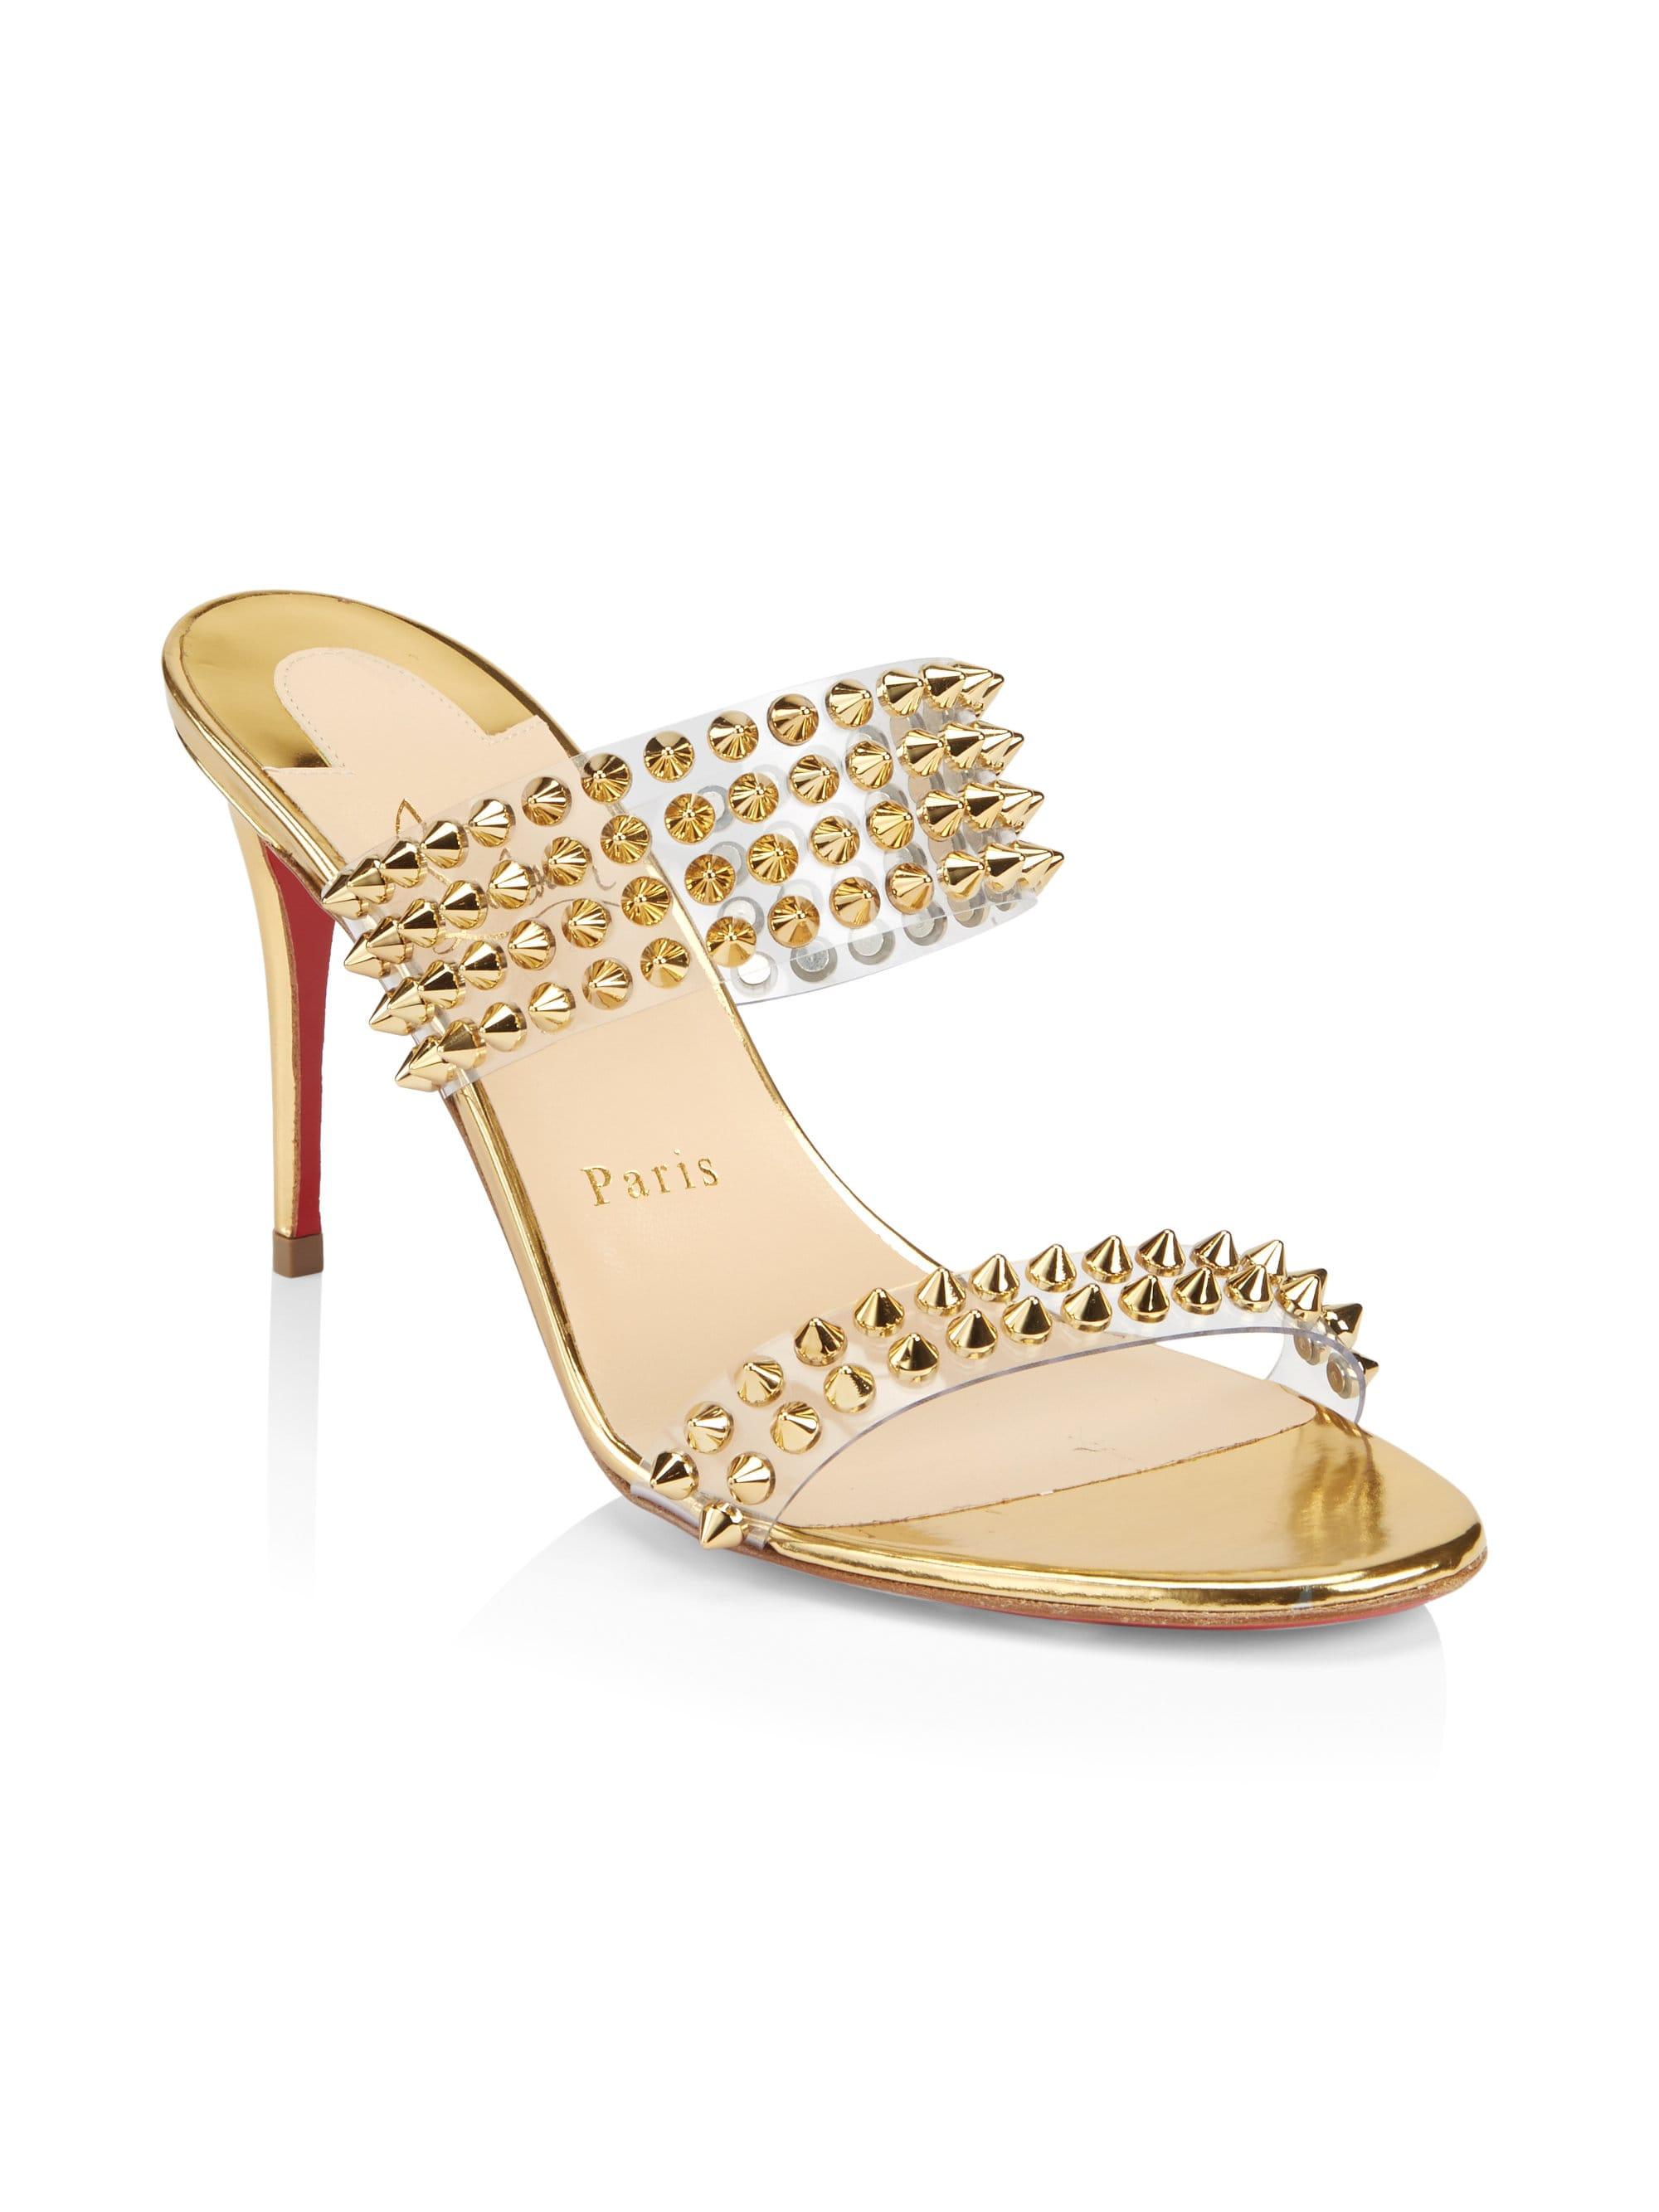 Christian Louboutin Leather Spike Only Heeled Mules in Gold (Metallic